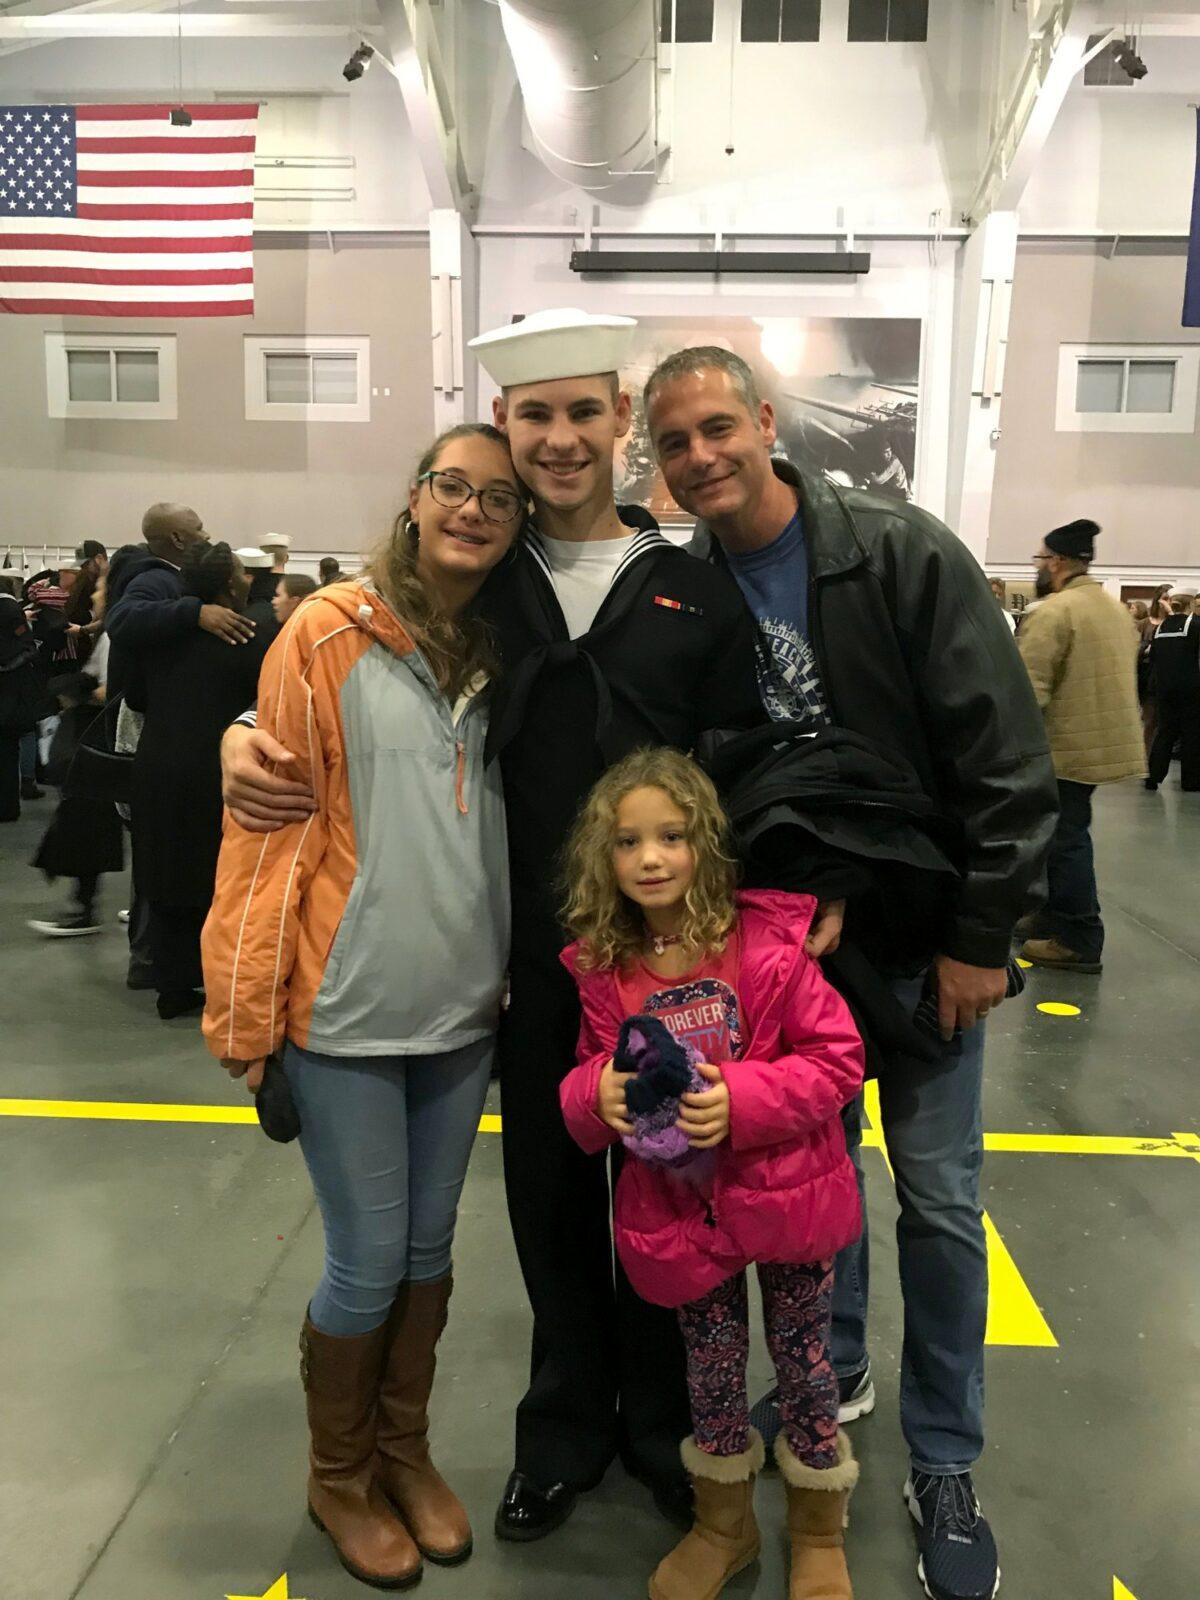 Cameron Walters (C) in Navy uniform, poses for a photo with his sisters and father, on Nov. 22, 2019, the day he graduated from boot camp in Great Lakes, Ill. (Heather Walters/Courtesy of the Walters Family via AP)